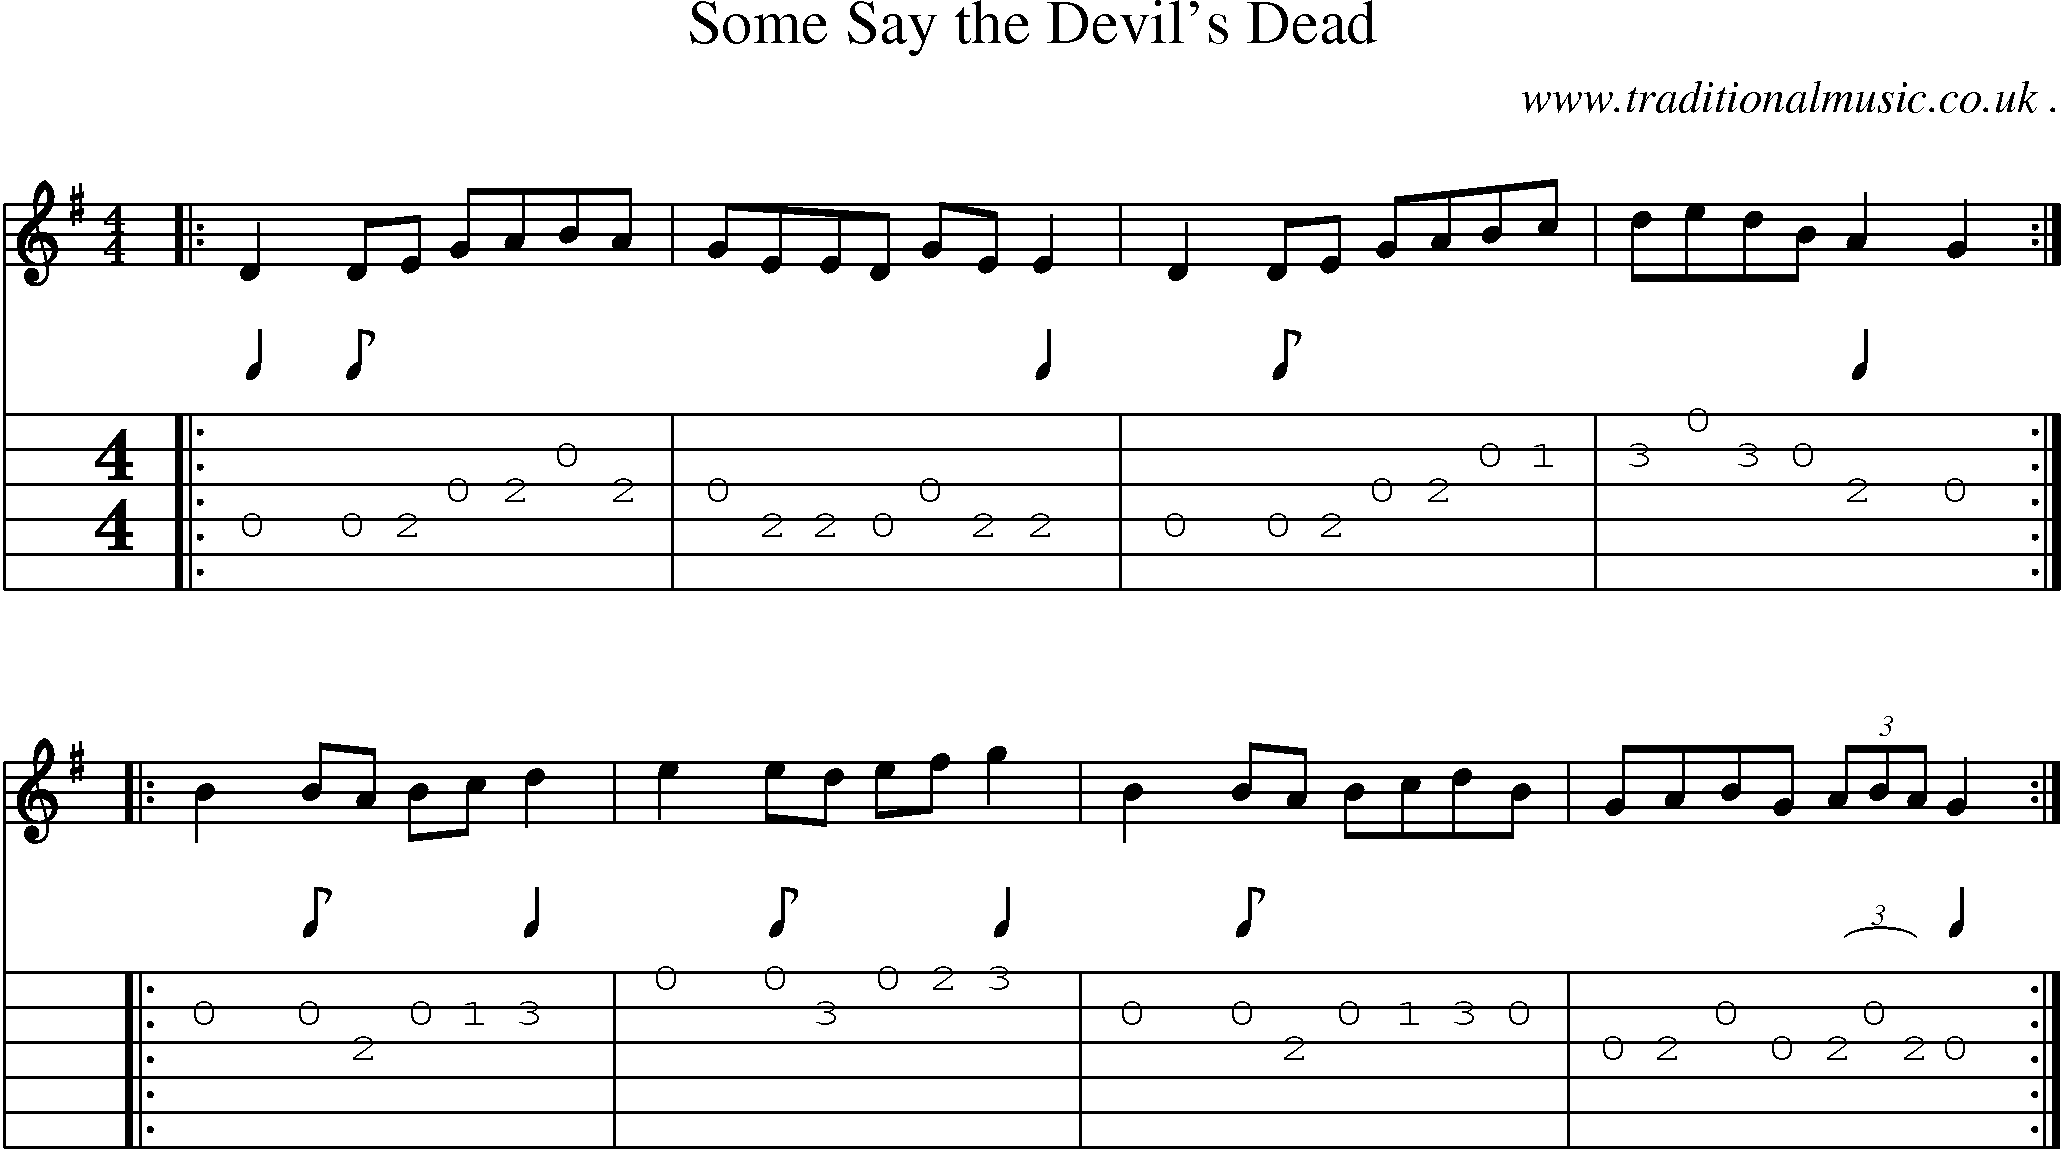 Sheet-music  score, Chords and Guitar Tabs for Some Say The Devils Dead